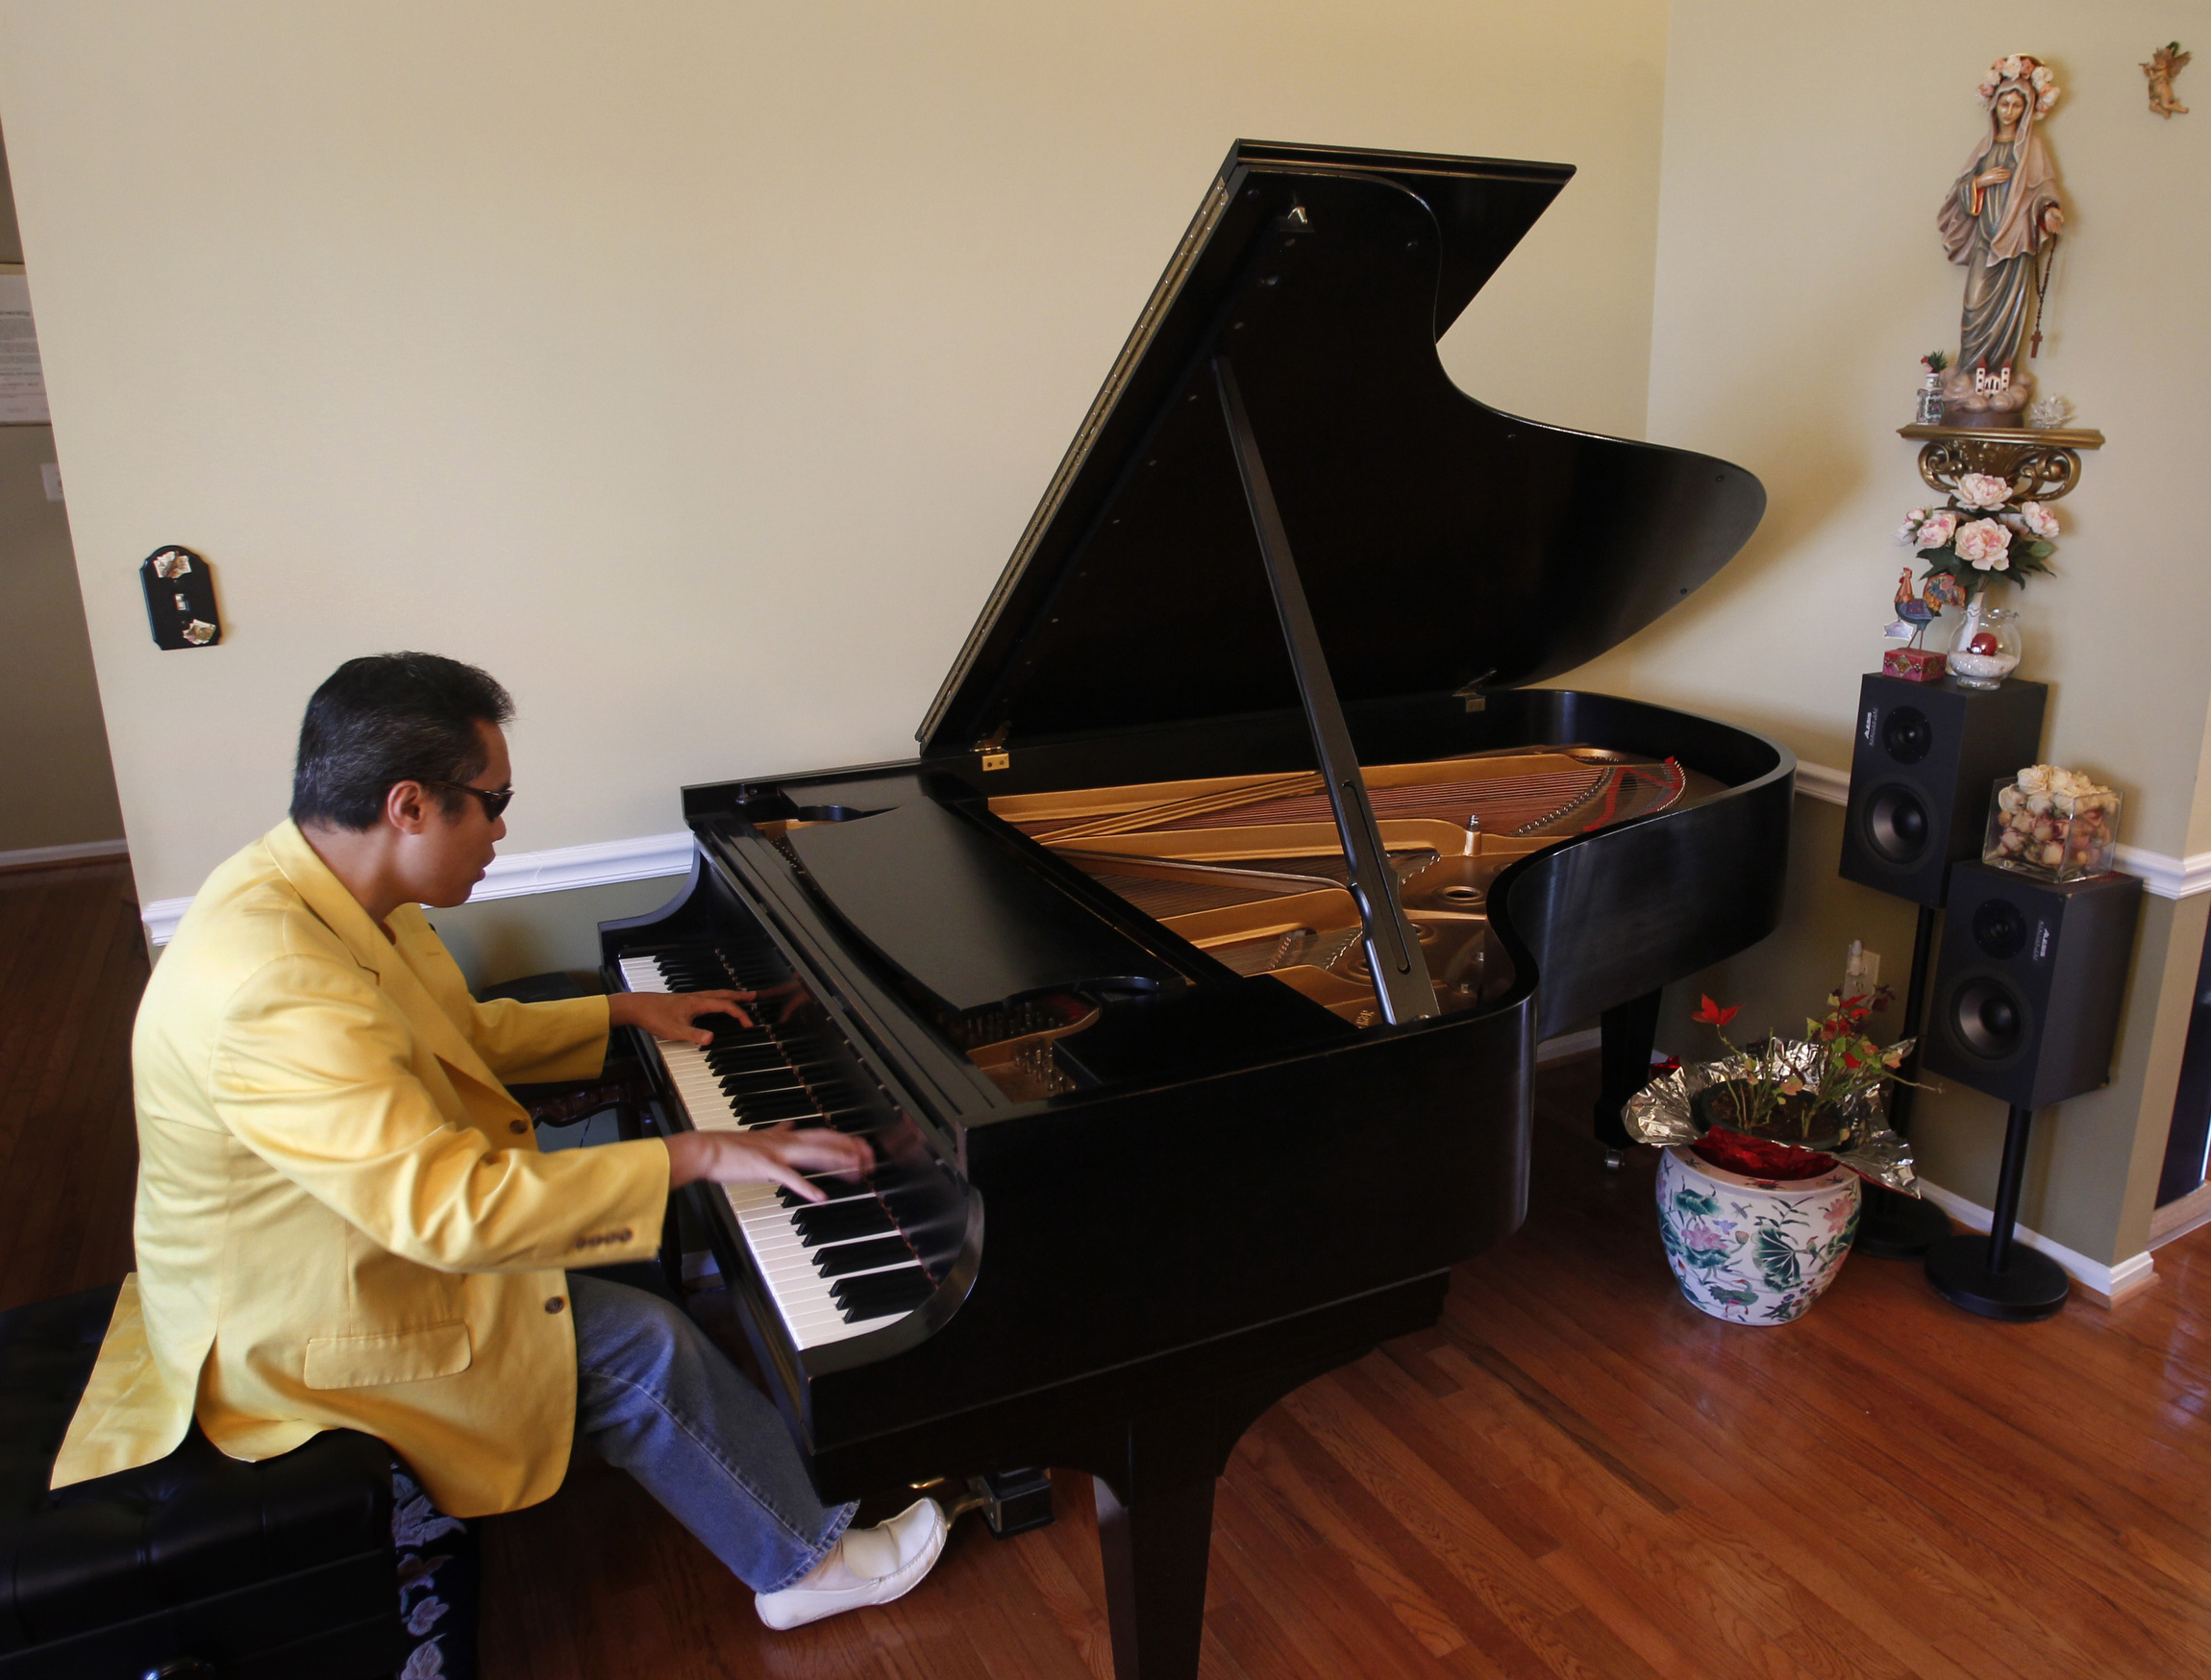 Pianist and tenor Carlos Ibay performs at his home in Fairfax, Va., April 9. Ibay, known as "Chucky," is in music ministry at his Catholic parish, St. Michael in Annandale, Va. He was born premature and spent the first three months of his life in an incu bator, where he lost his sight because of too much oxygen. (CNS photo /Bob Roller)